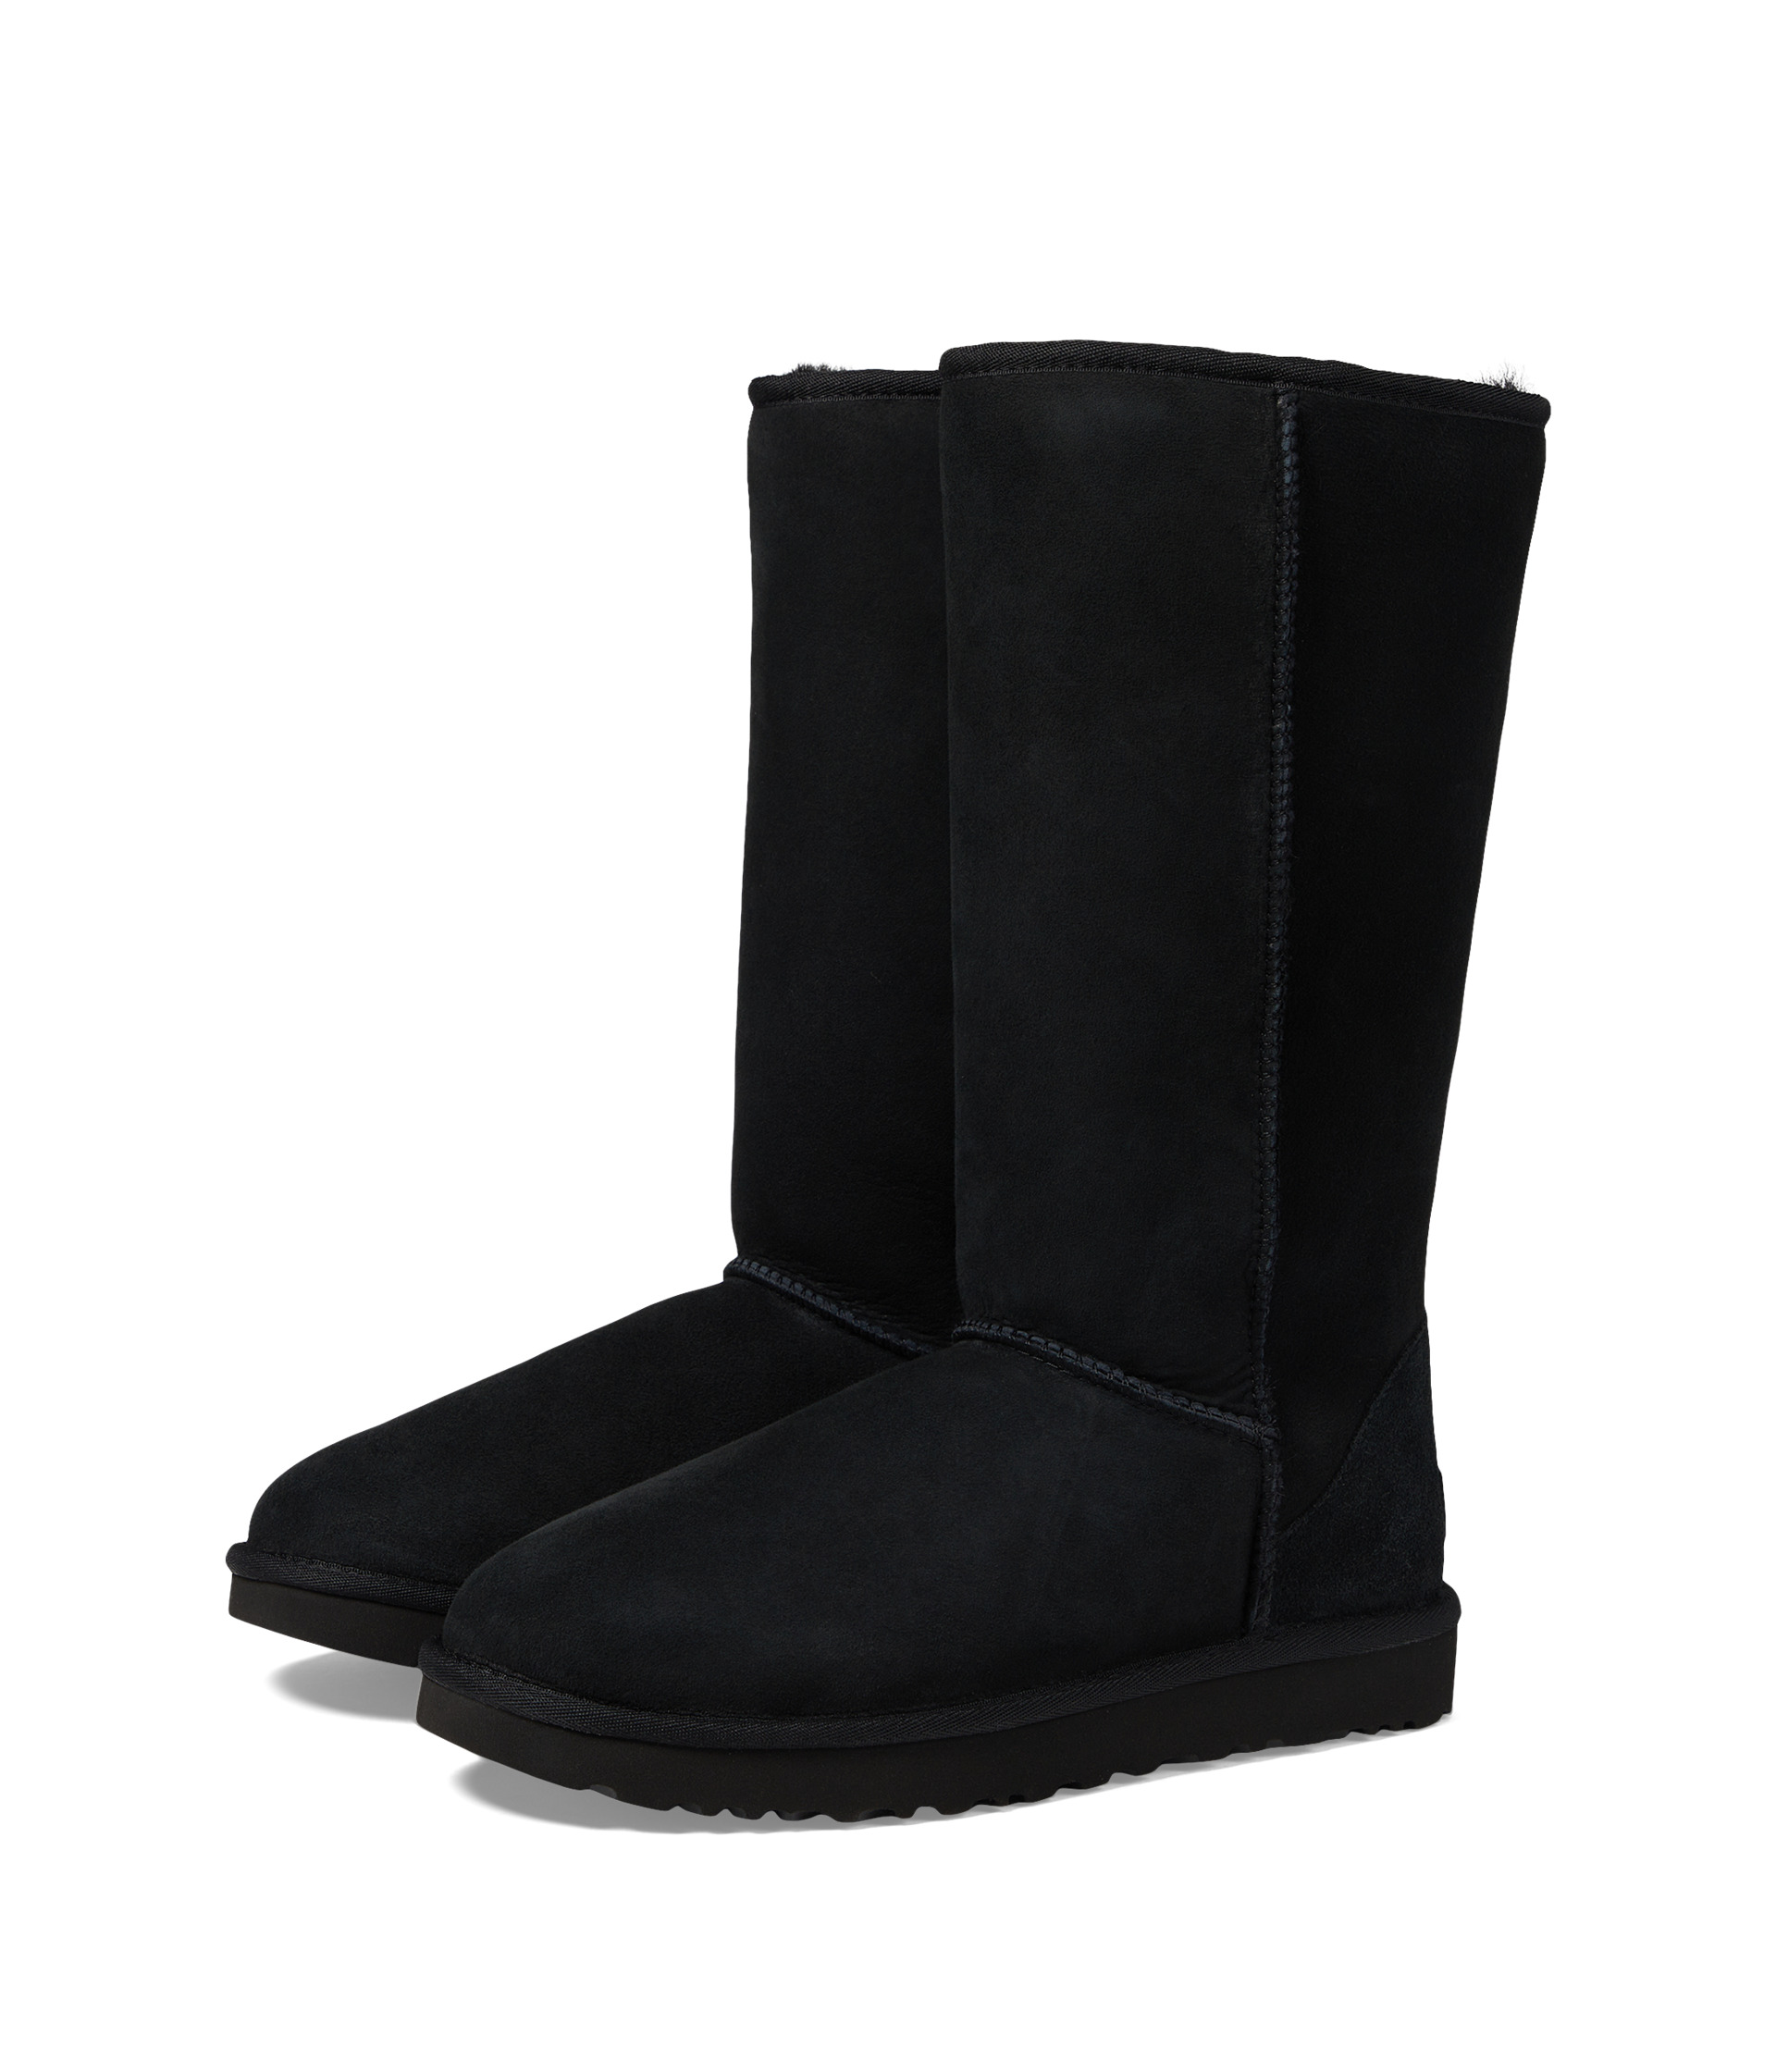 UGG Classic Tall II at Zappos.com